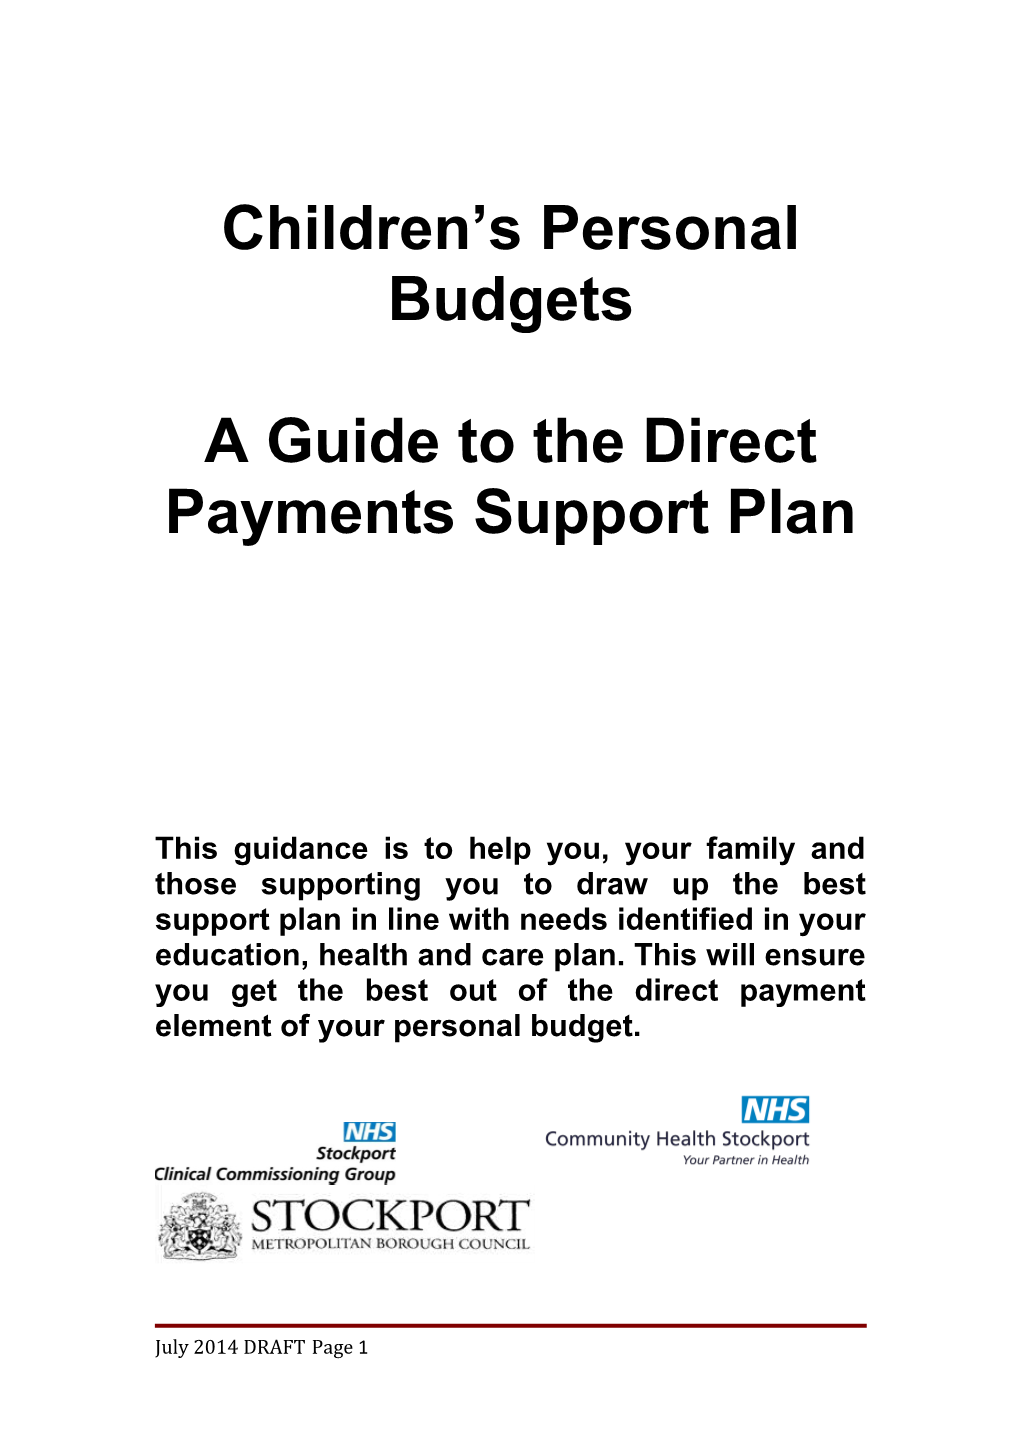 A Guide to the Direct Payments Support Plan